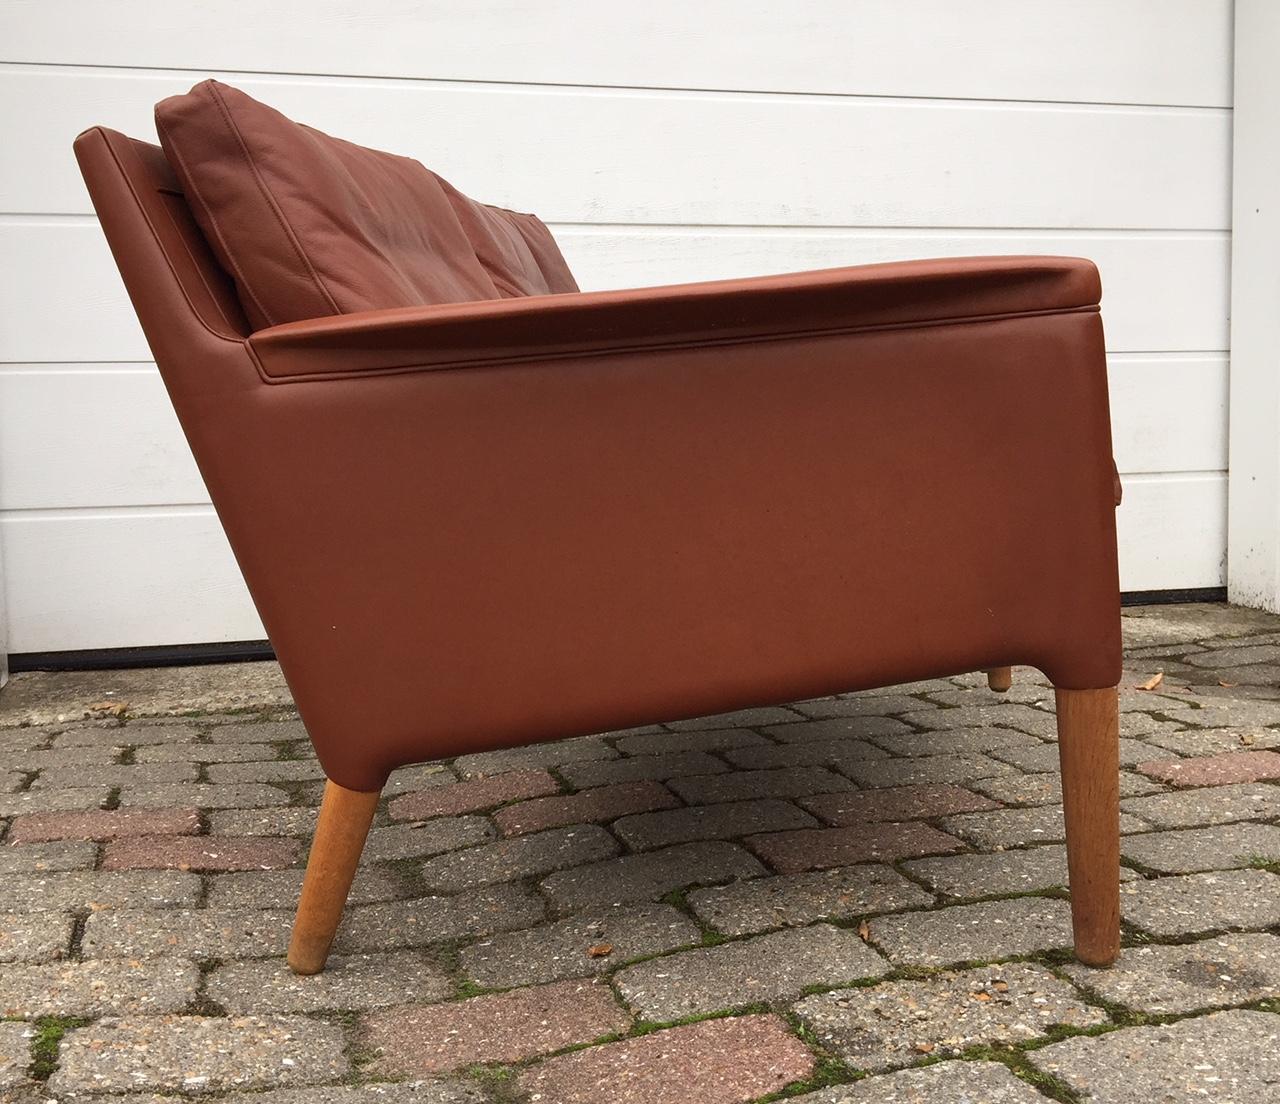 Kurt Ostervig designed tanned leather two-seated sofa or Settee with tapered oak legs. It features original upholstery and intricate leather upholstery details around the top part of the legs and to the armrests. It was manufactured by Centrum